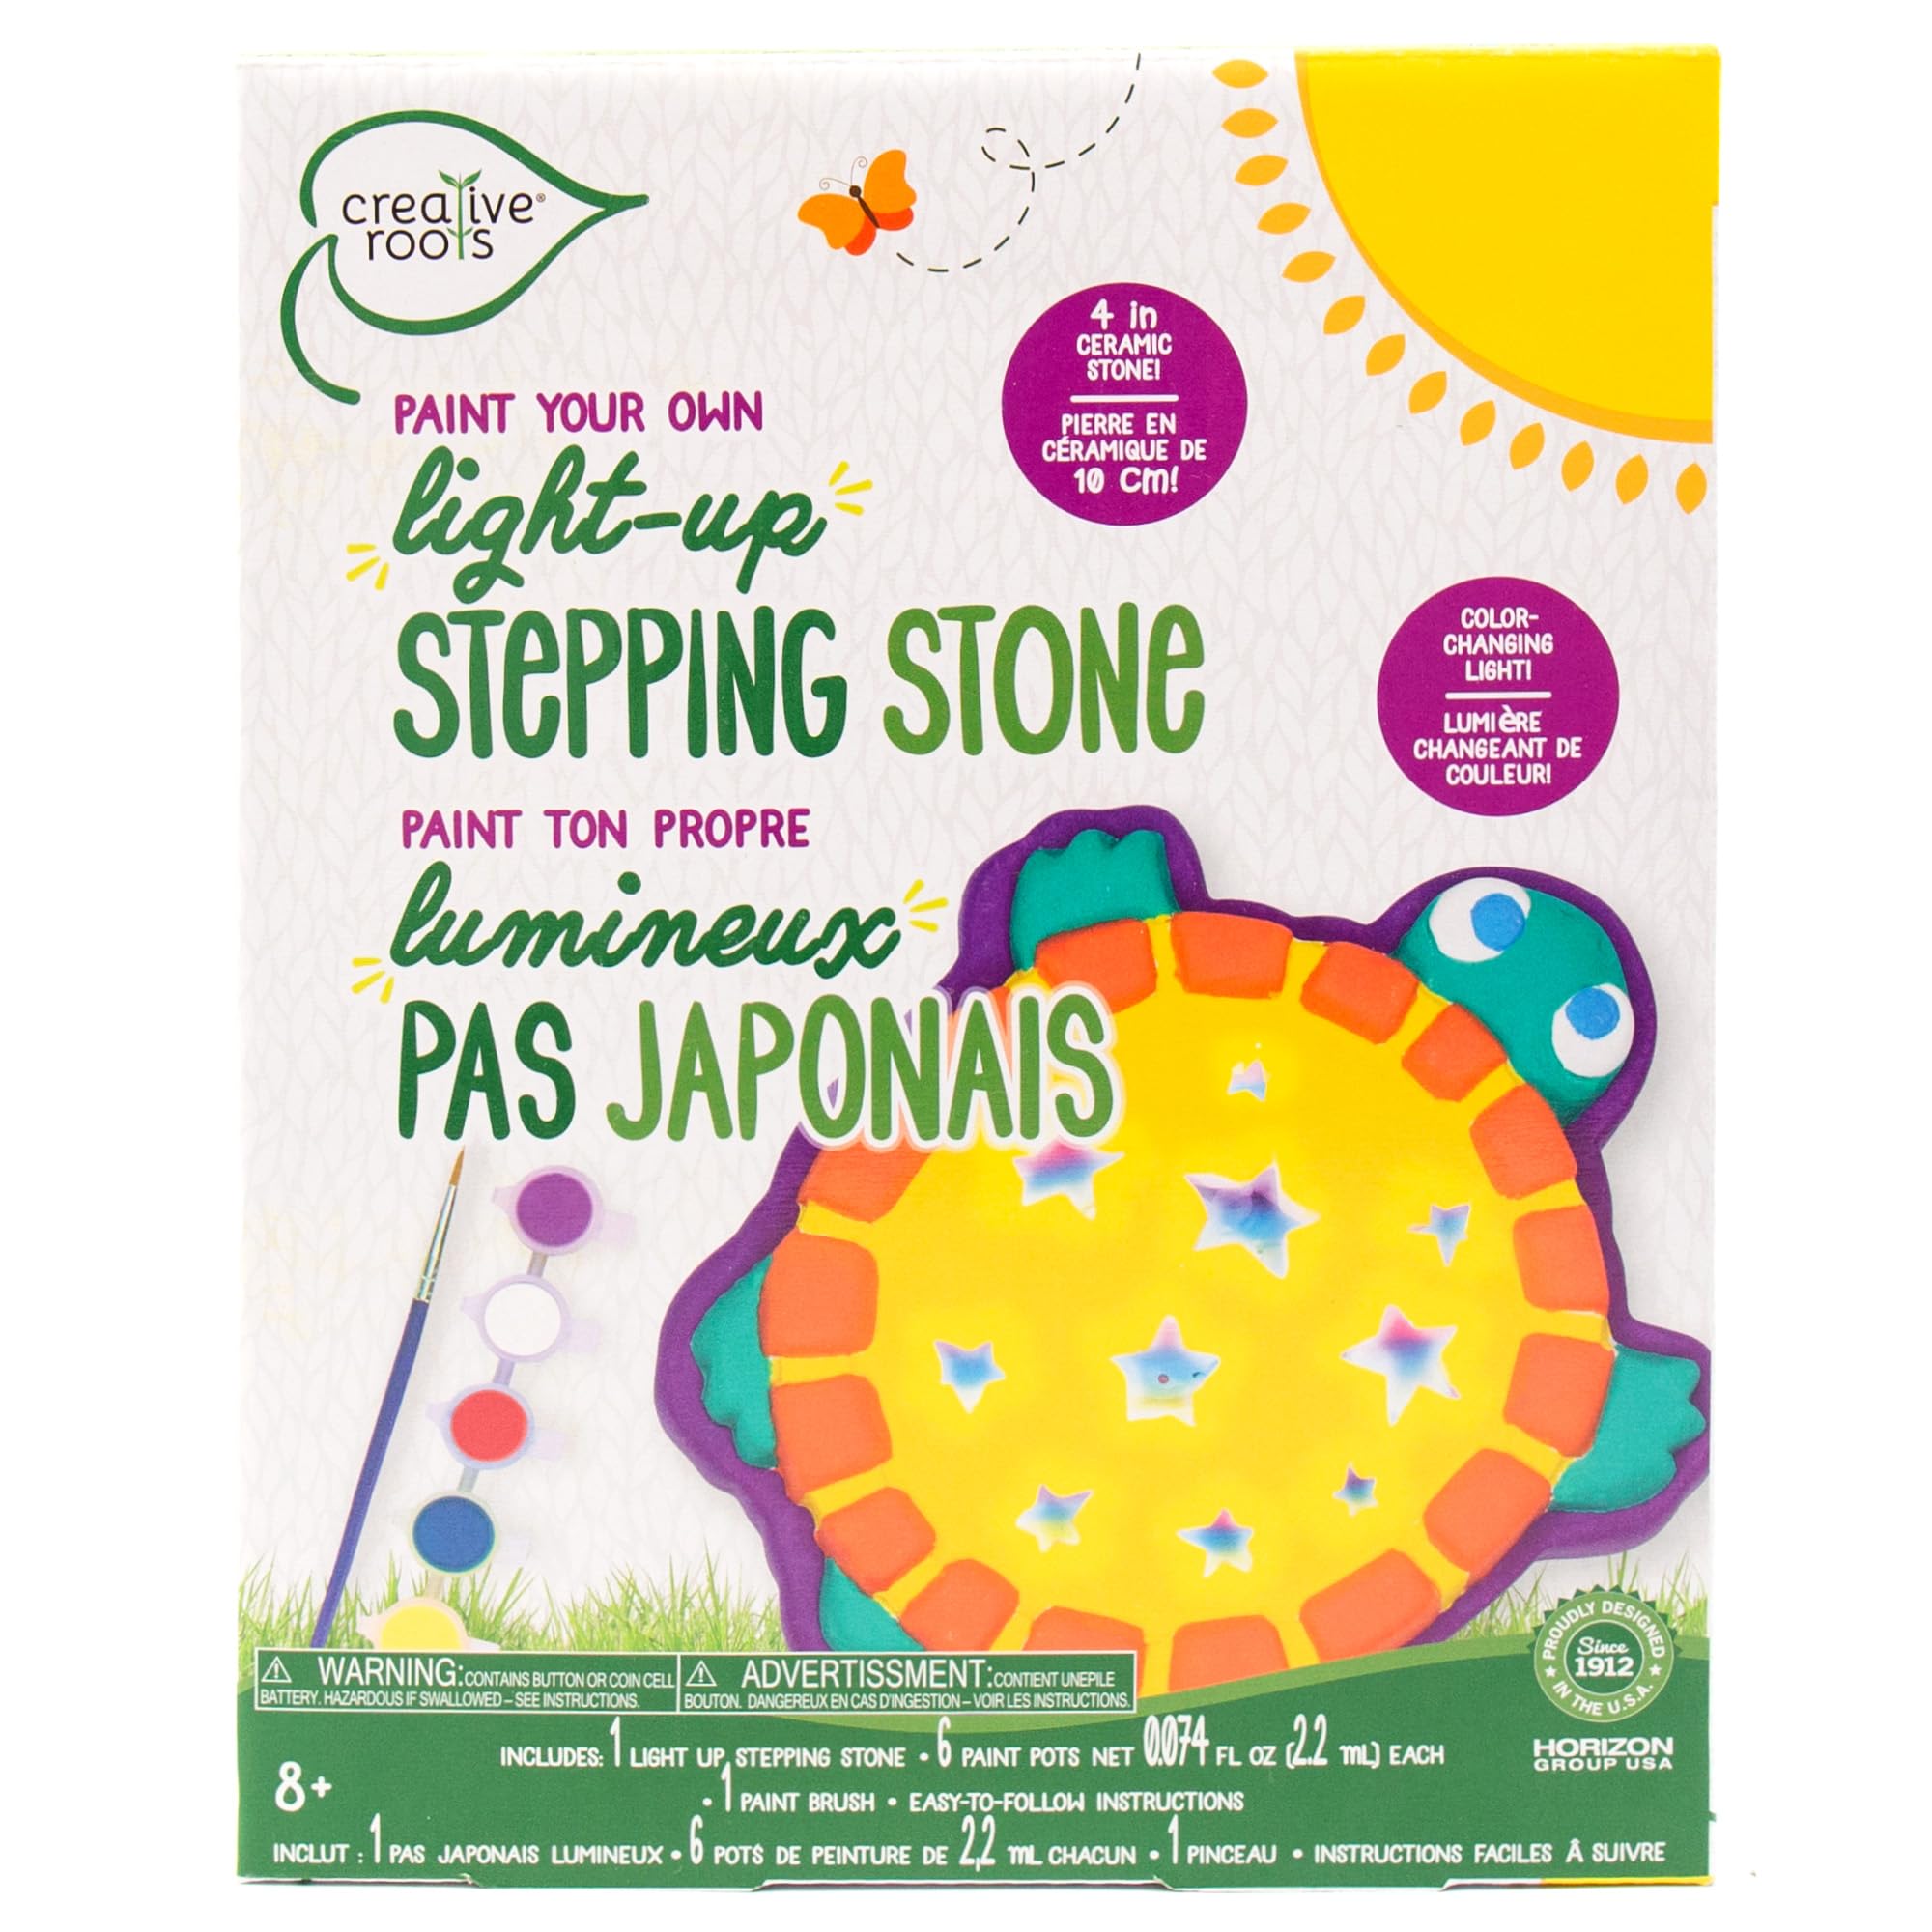 Creative Roots Paint Your Own Light-Up Turtle Stepping Stone, Paintable 3.9 x 4.5-inch Ceramic Light-Up Turtle, Includes 6 Acrylic Paints & Paintbrush, Great Arts and Crafts for Kids Ages 8-12